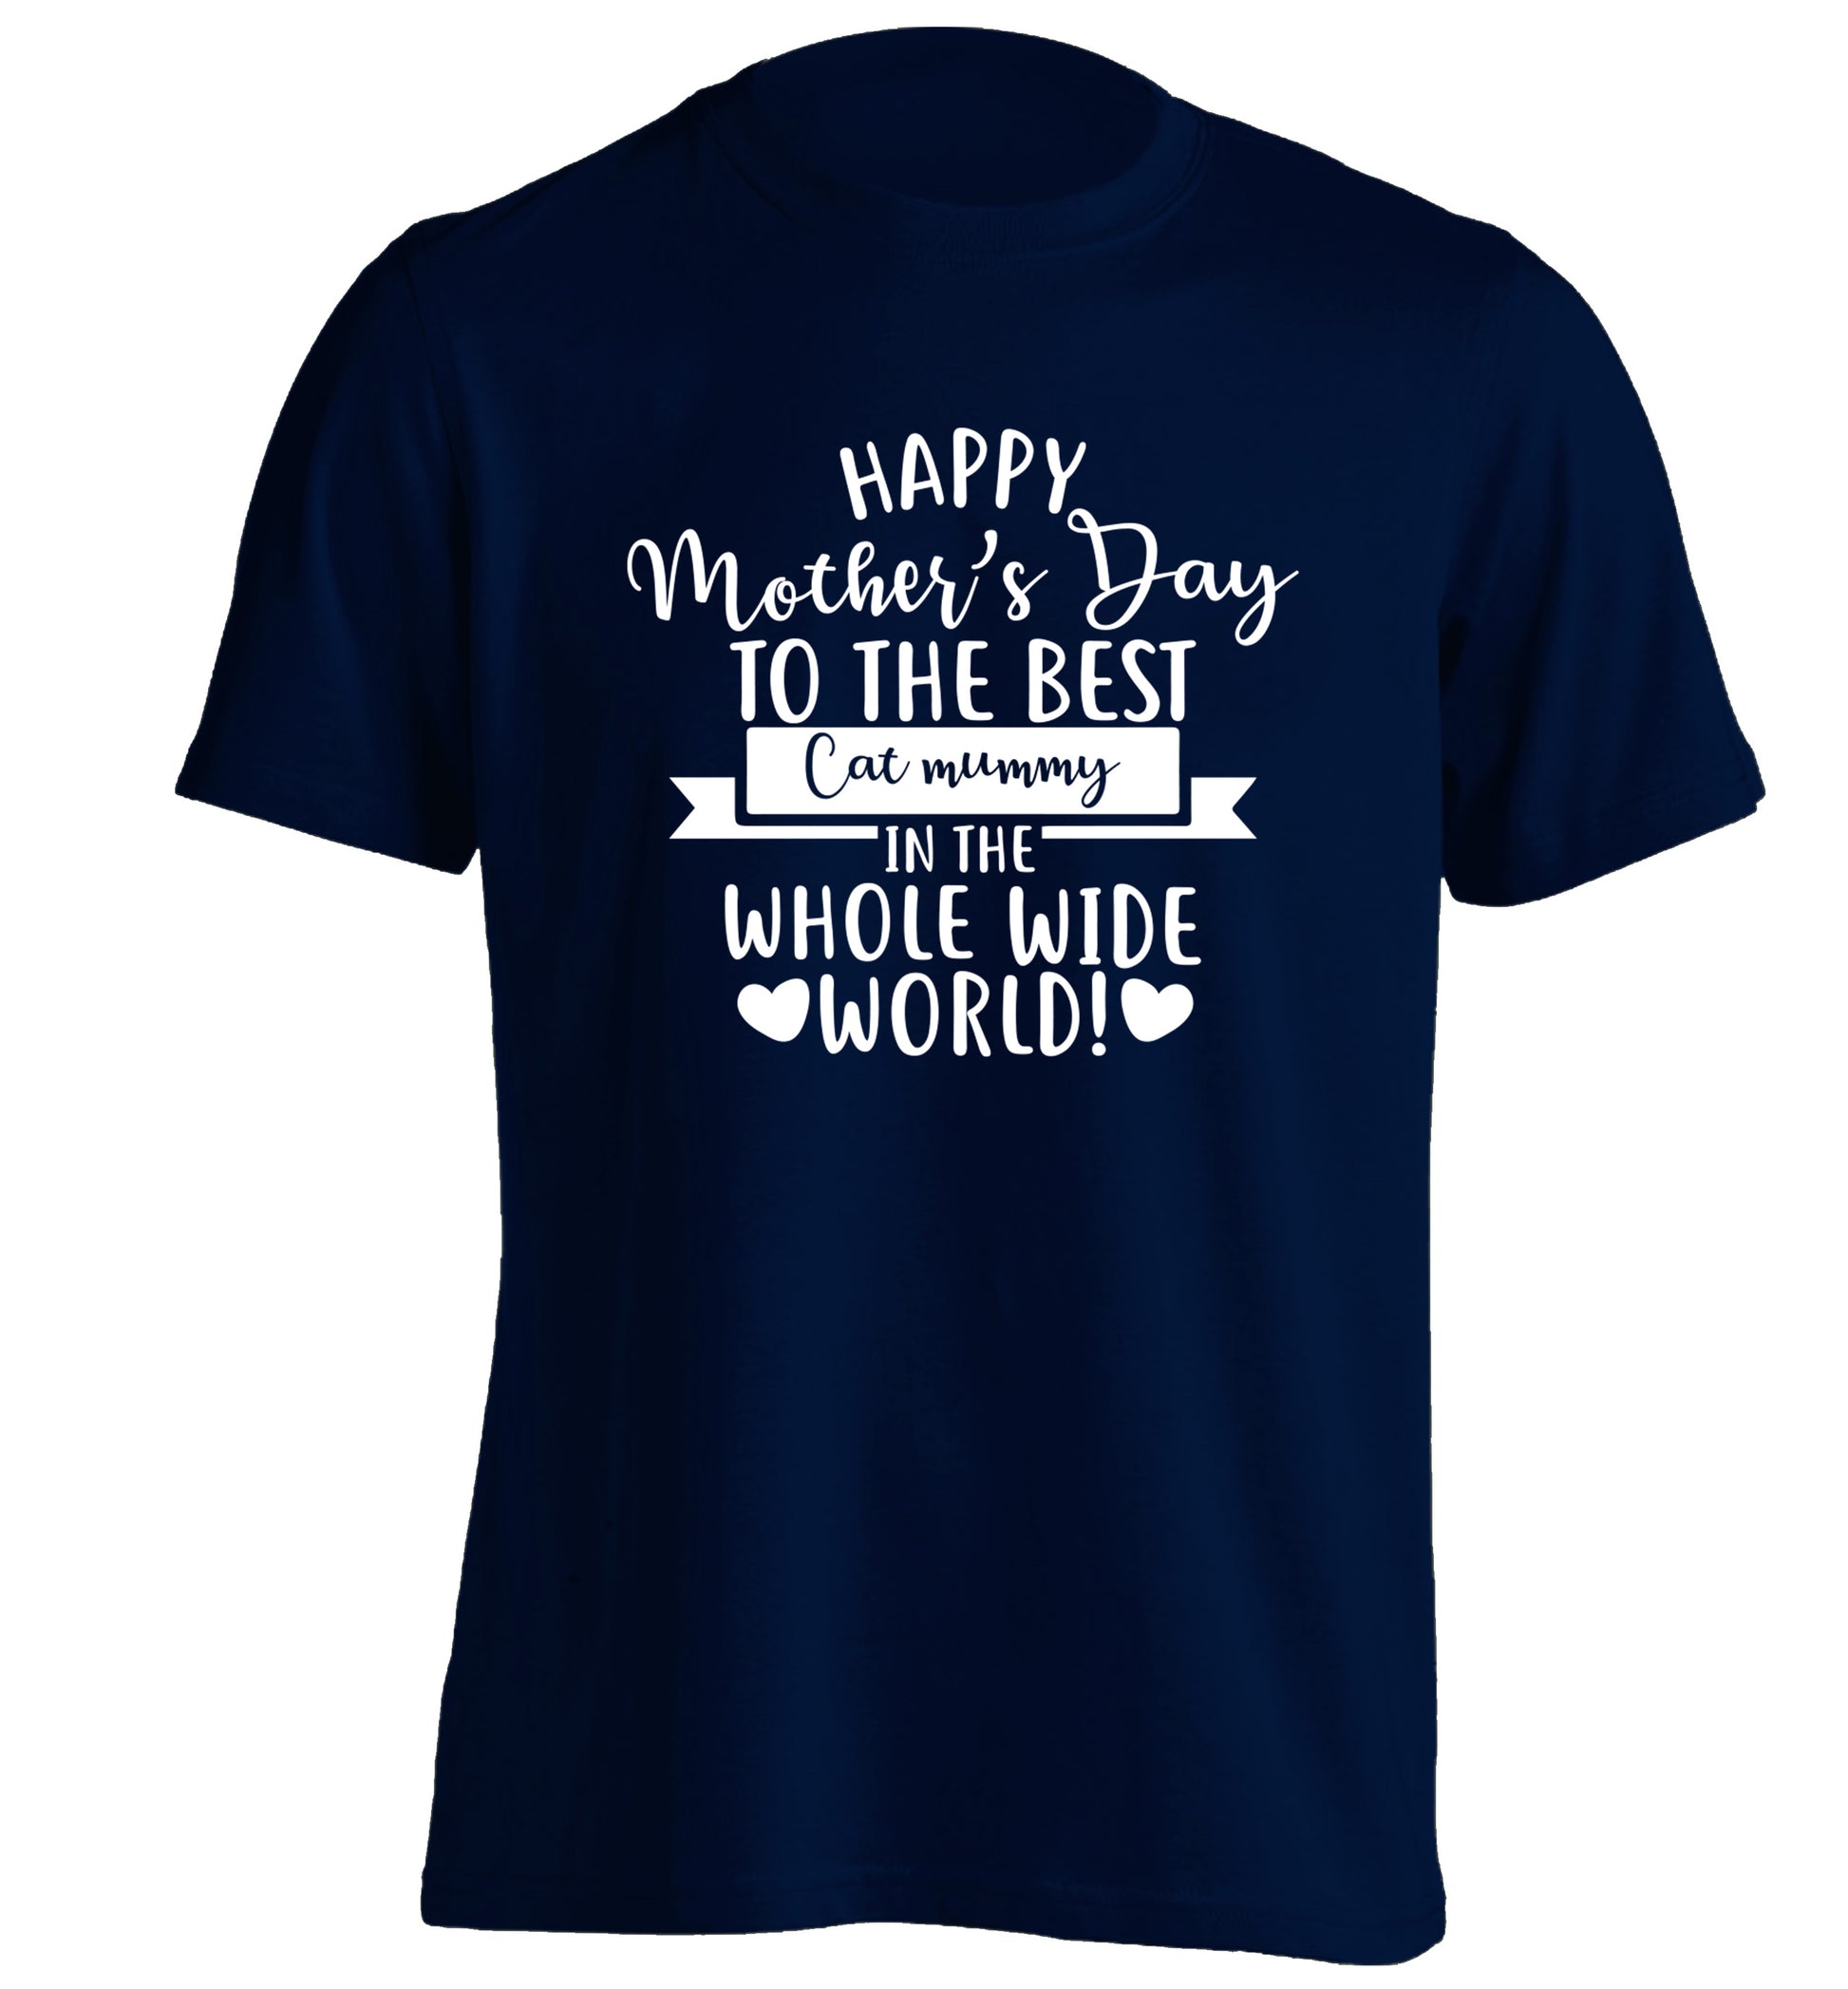 Happy mother's day to the best cat mummy in the world adults unisex navy Tshirt 2XL